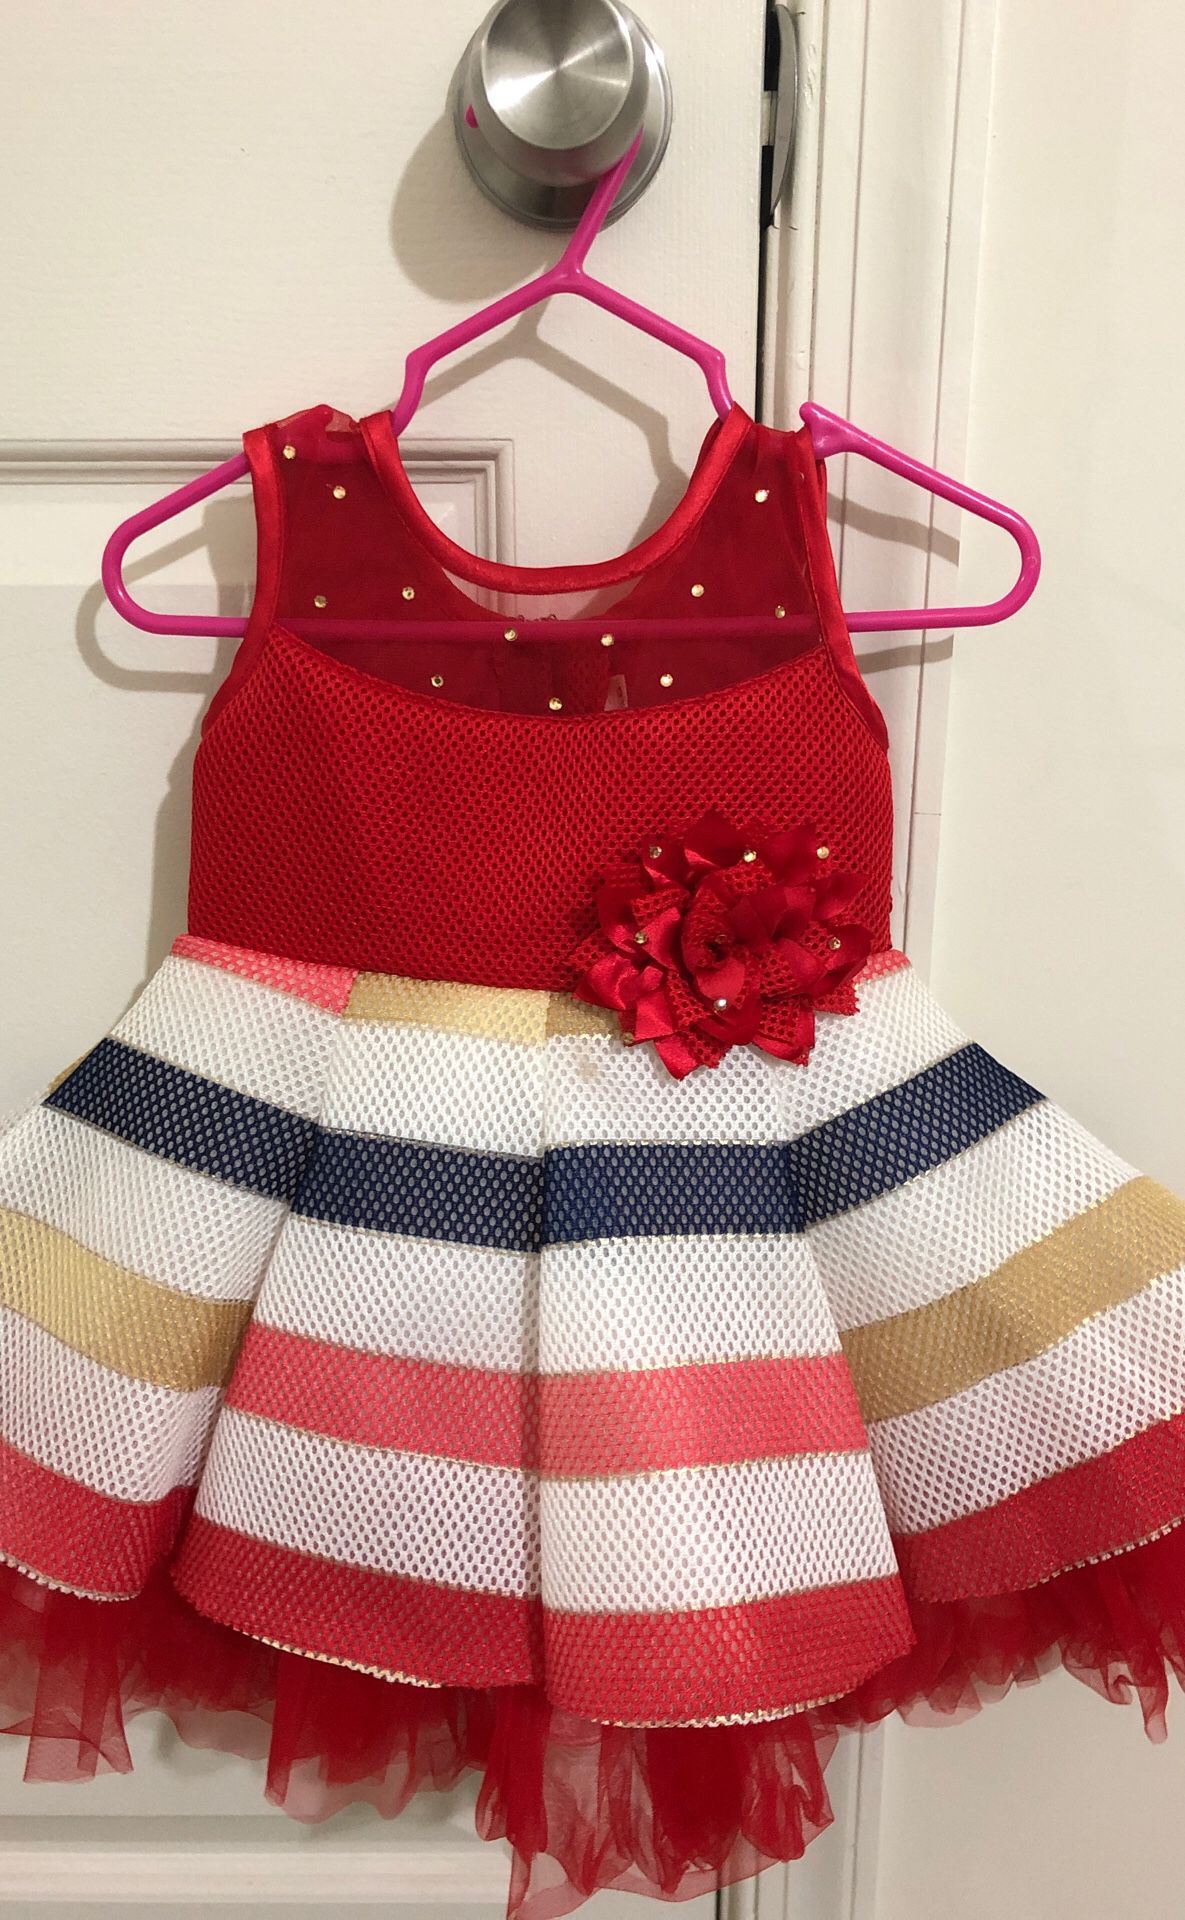 Red and white jute dress